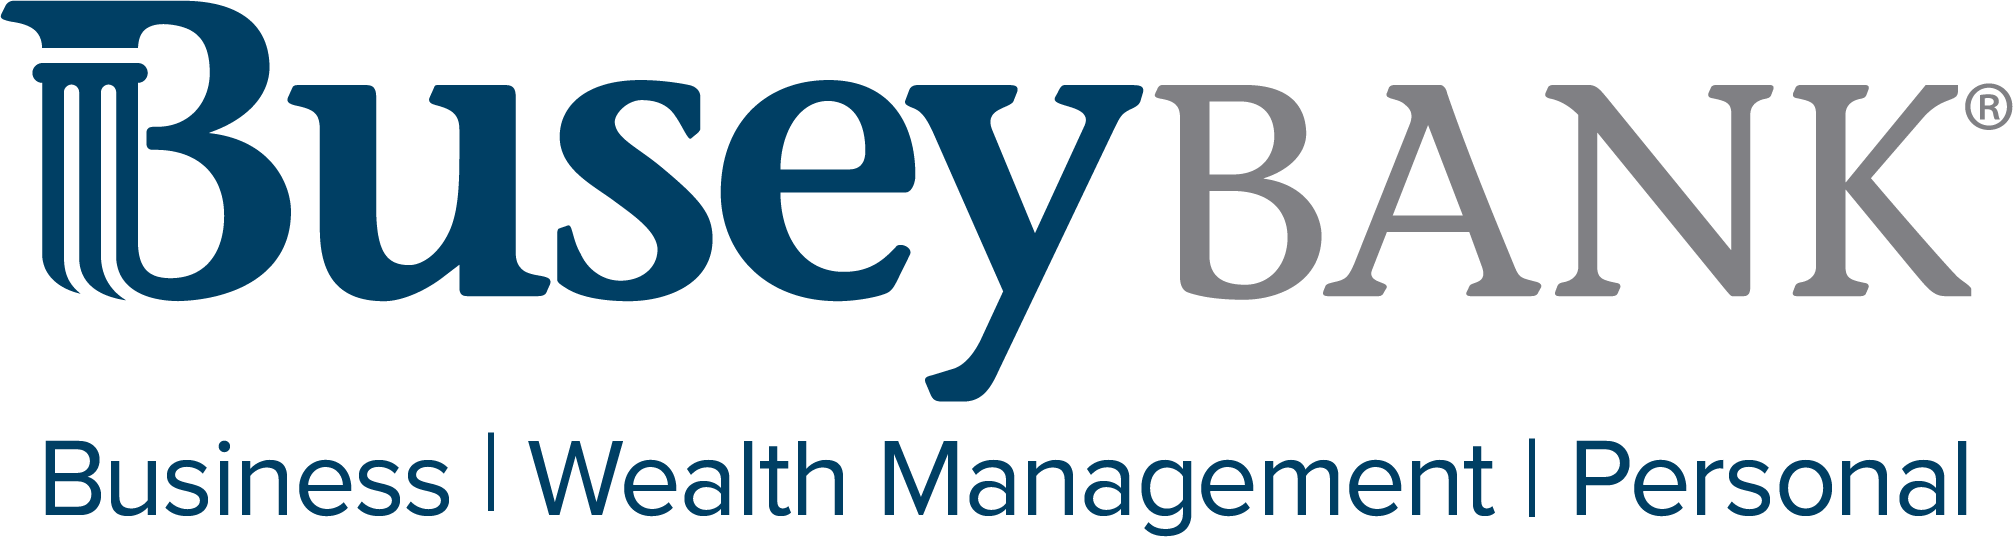 Busey Bank: Business, Wealth Management, Personal.